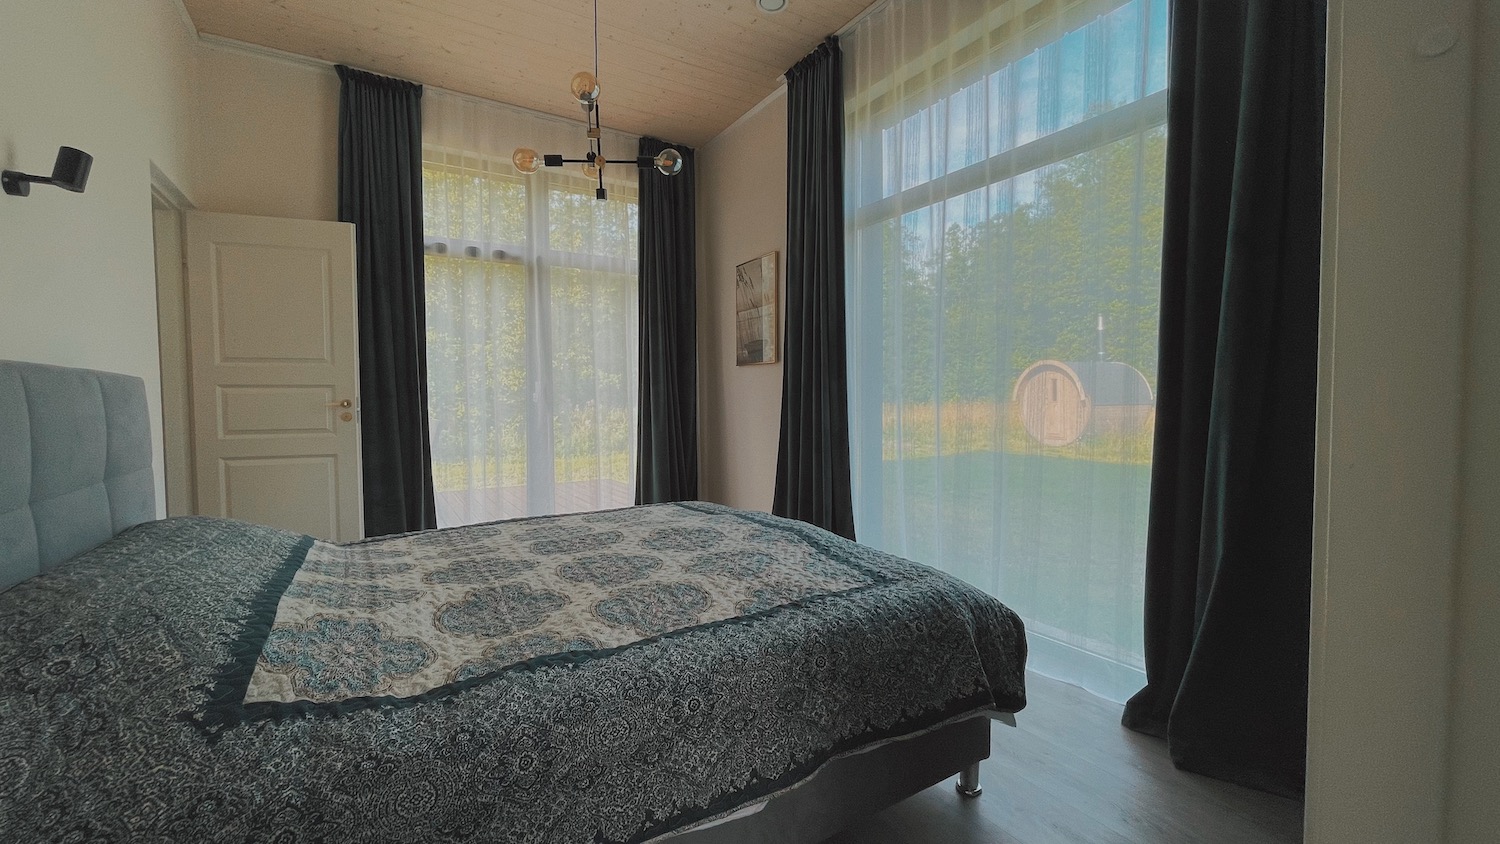 Vintse Villa holiday home for families family kids in Estonia, best Estonian cottages and cabins